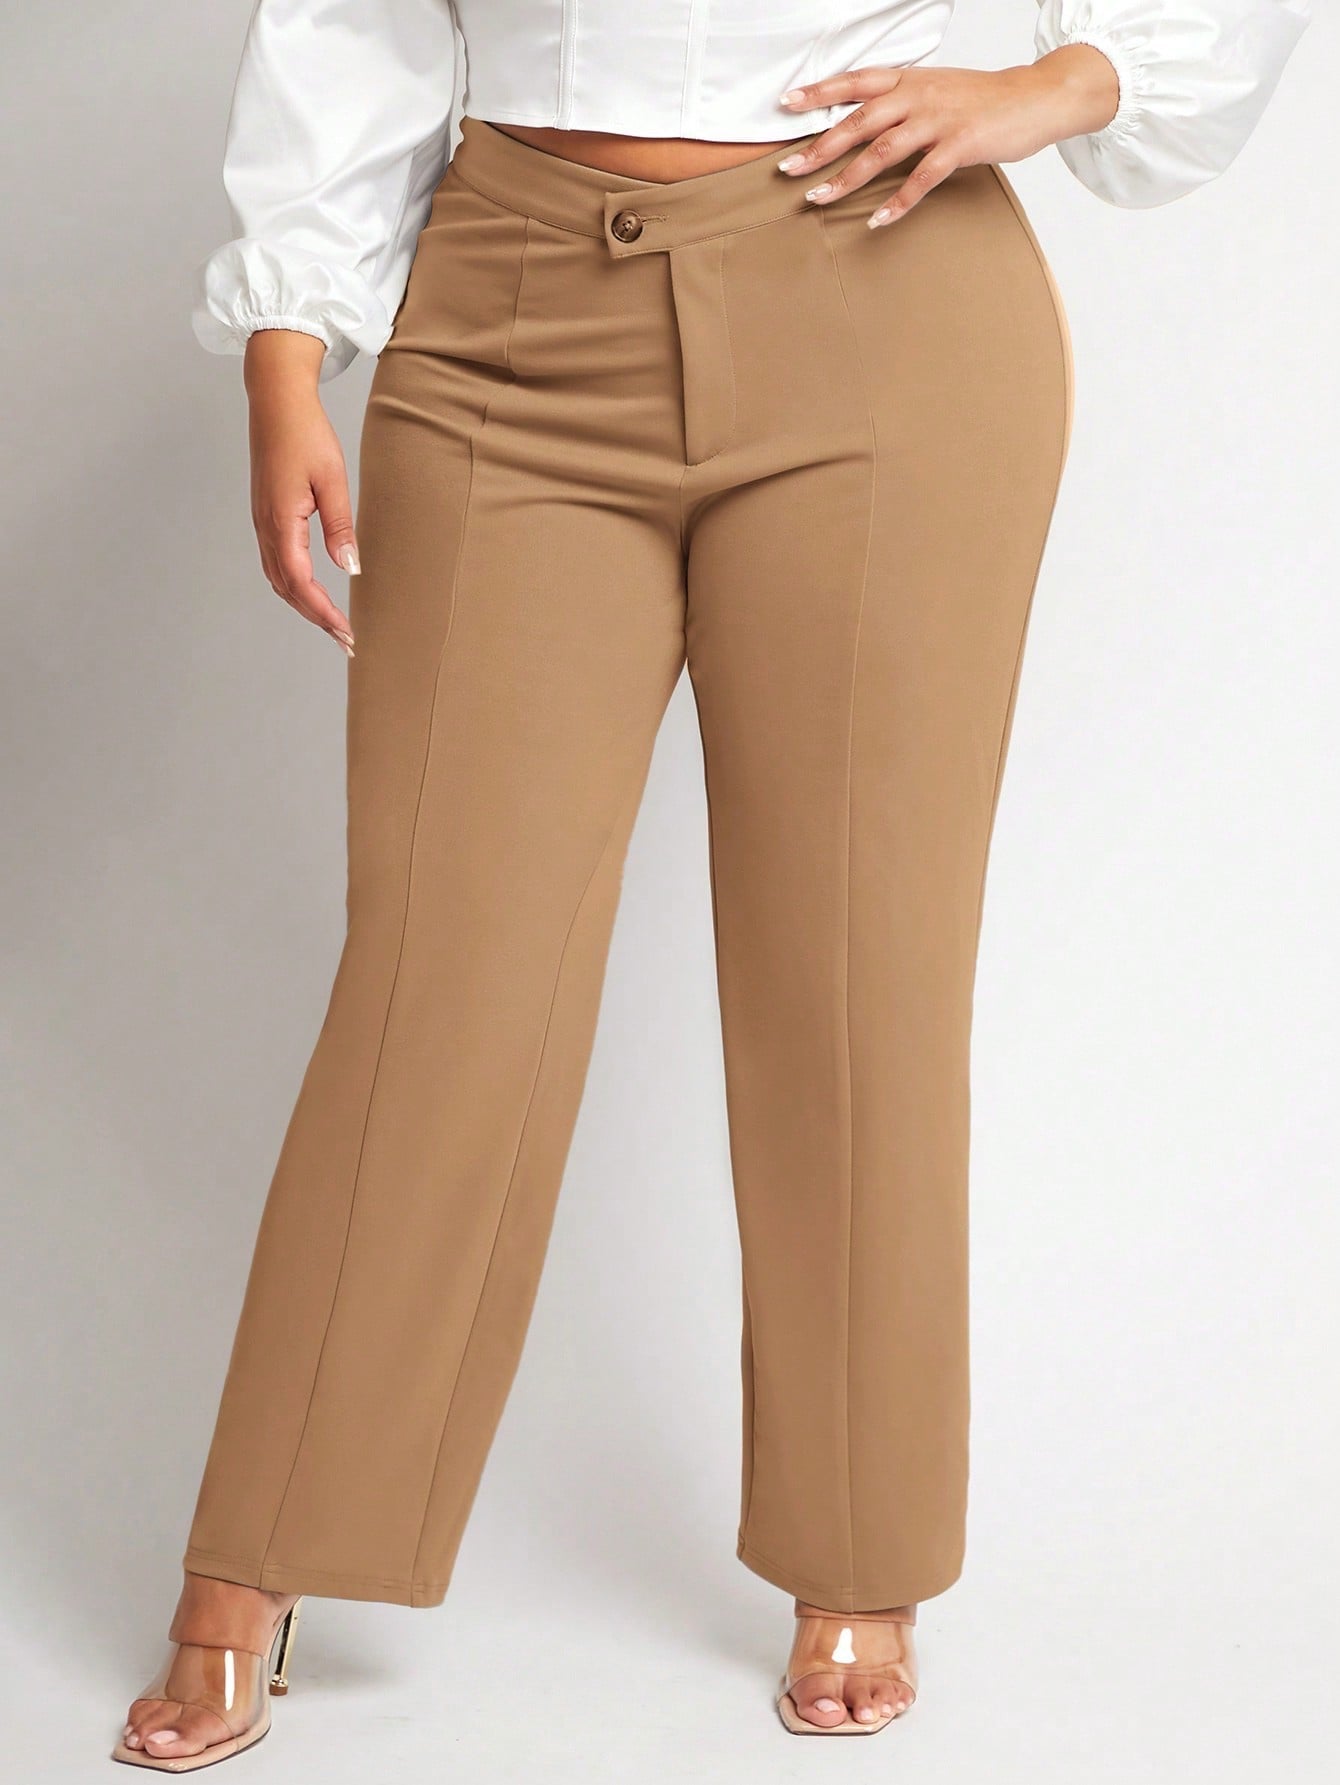 Camel Colored Pants